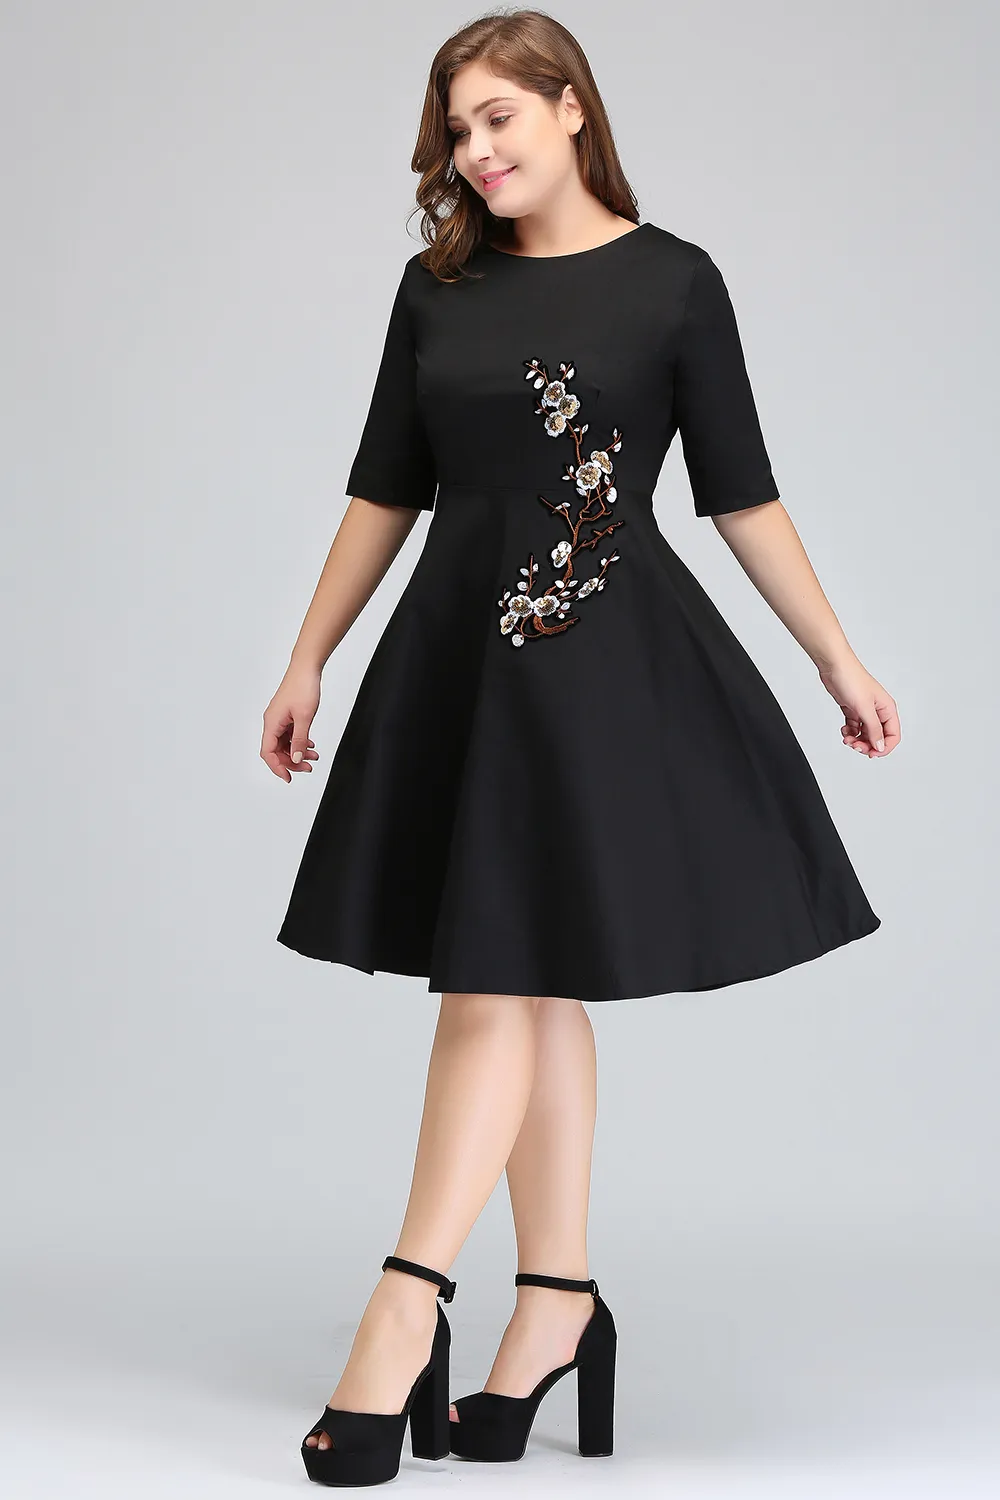 Vintage Audrey Hepburn Style Rockabilly Dress For Plus Size Women Perfect  For Parties, Cheap Cocktails Events, And Formal Work 4XL FS0794 From  Wholesalefactory, $16.86